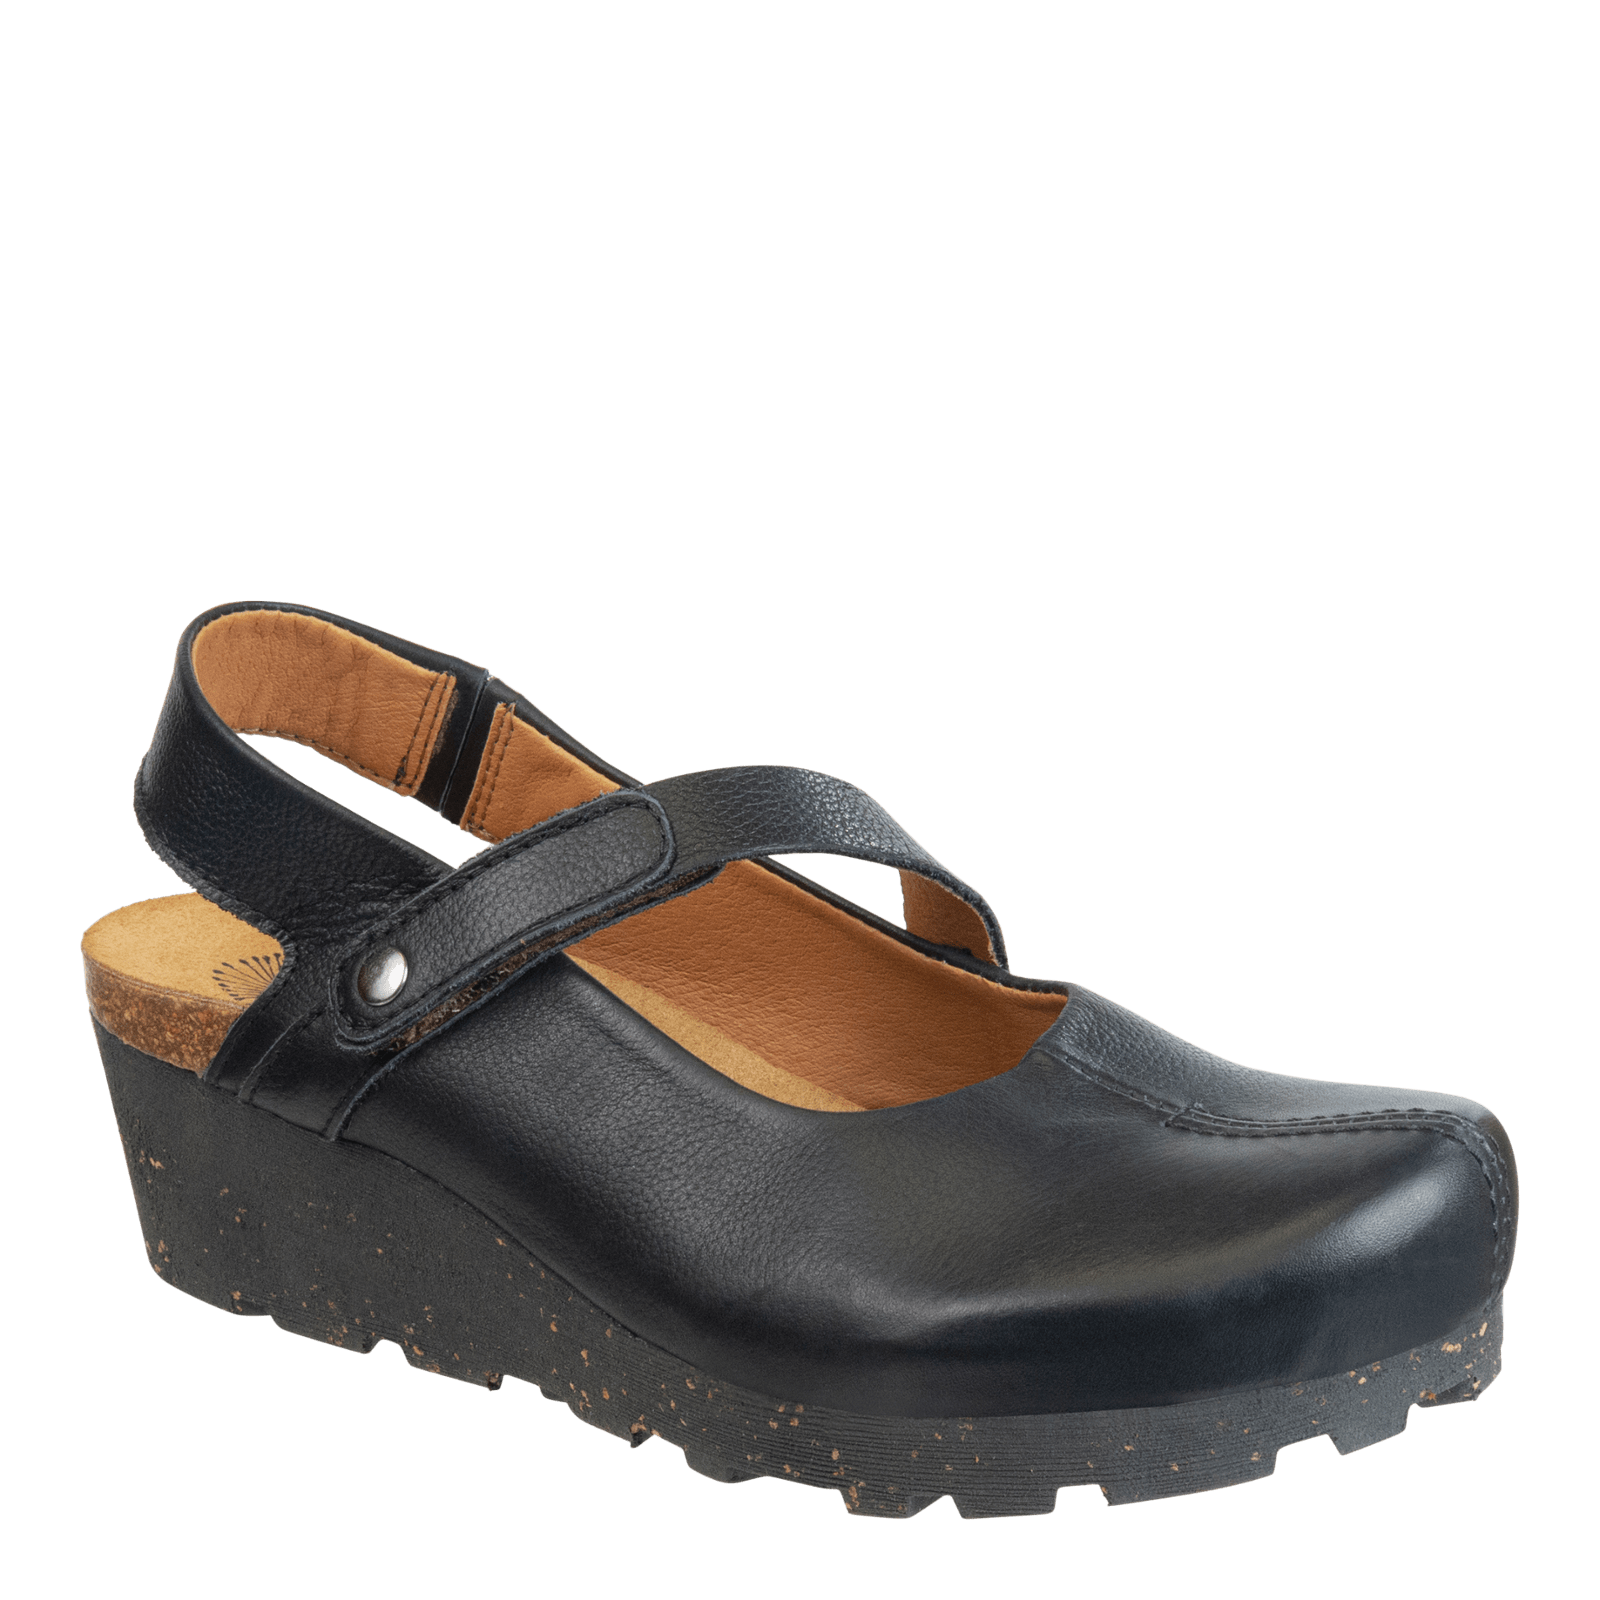 PROG in BLACK LEATHER Wedge Clogs